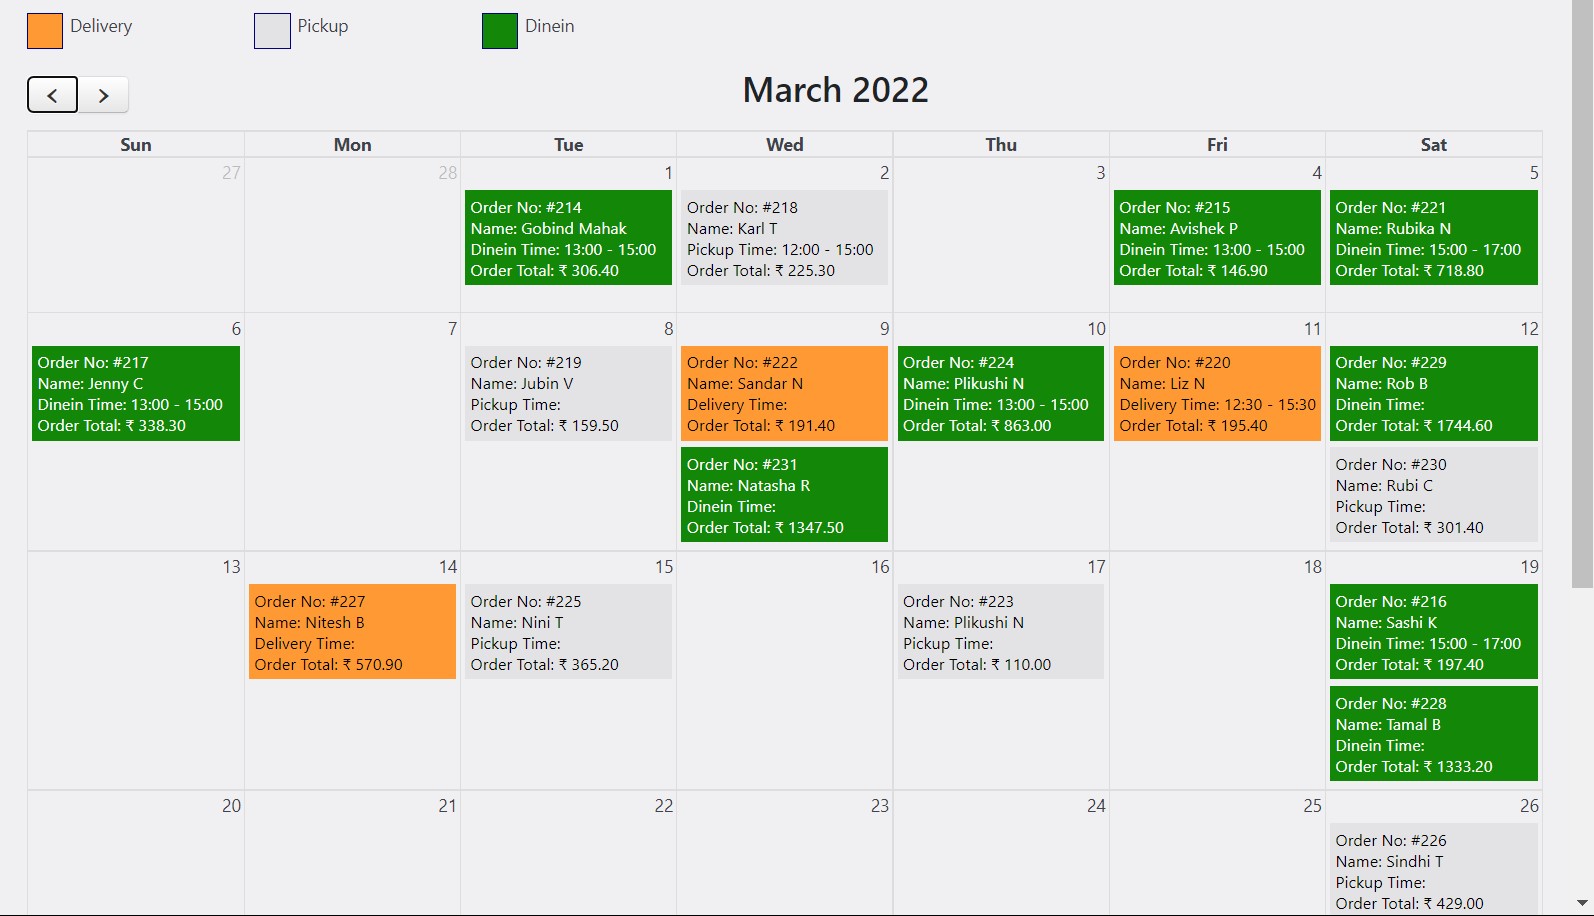 See all upcoming deliveries/pickups/dine-in bookings on a monthly calendar view